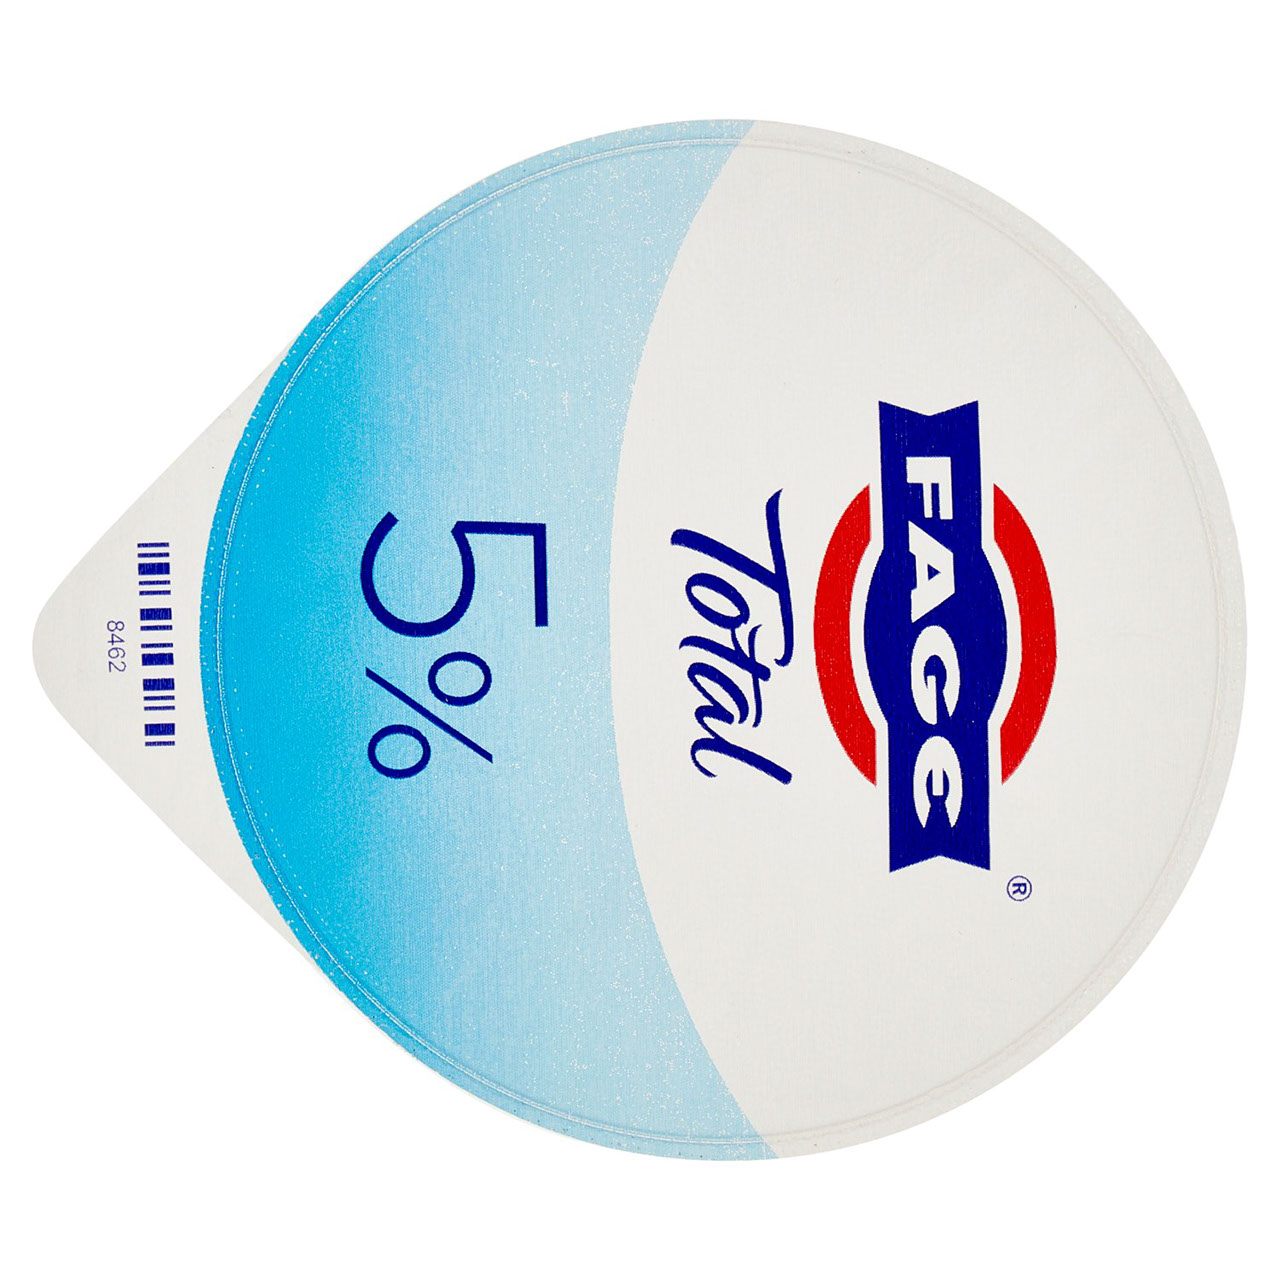 Fage Total 5% Grassi 150 g